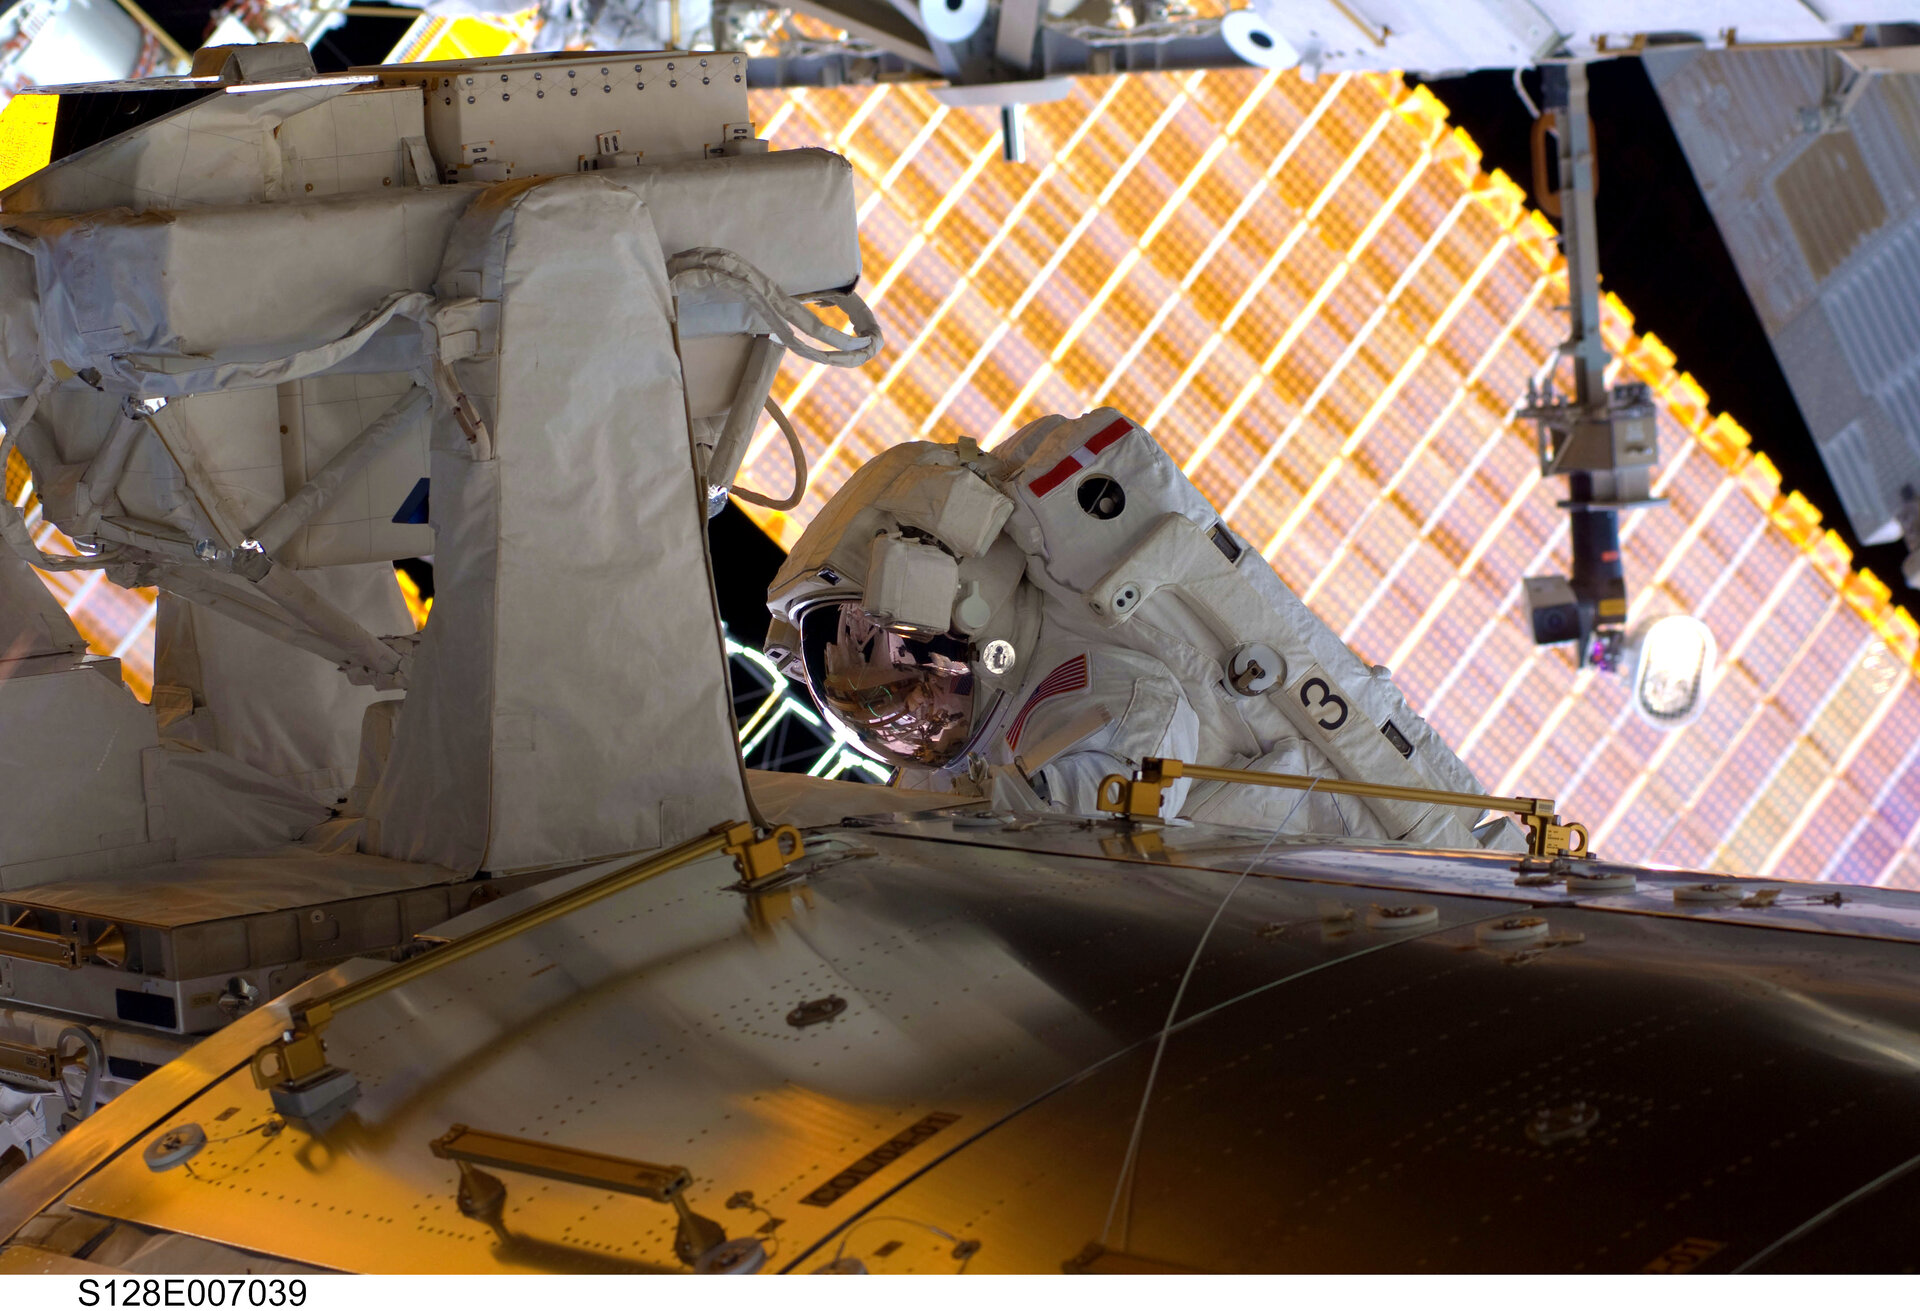 NASA astronaut Nicole Stott works to remove the EuTEF from the outside of Columbus